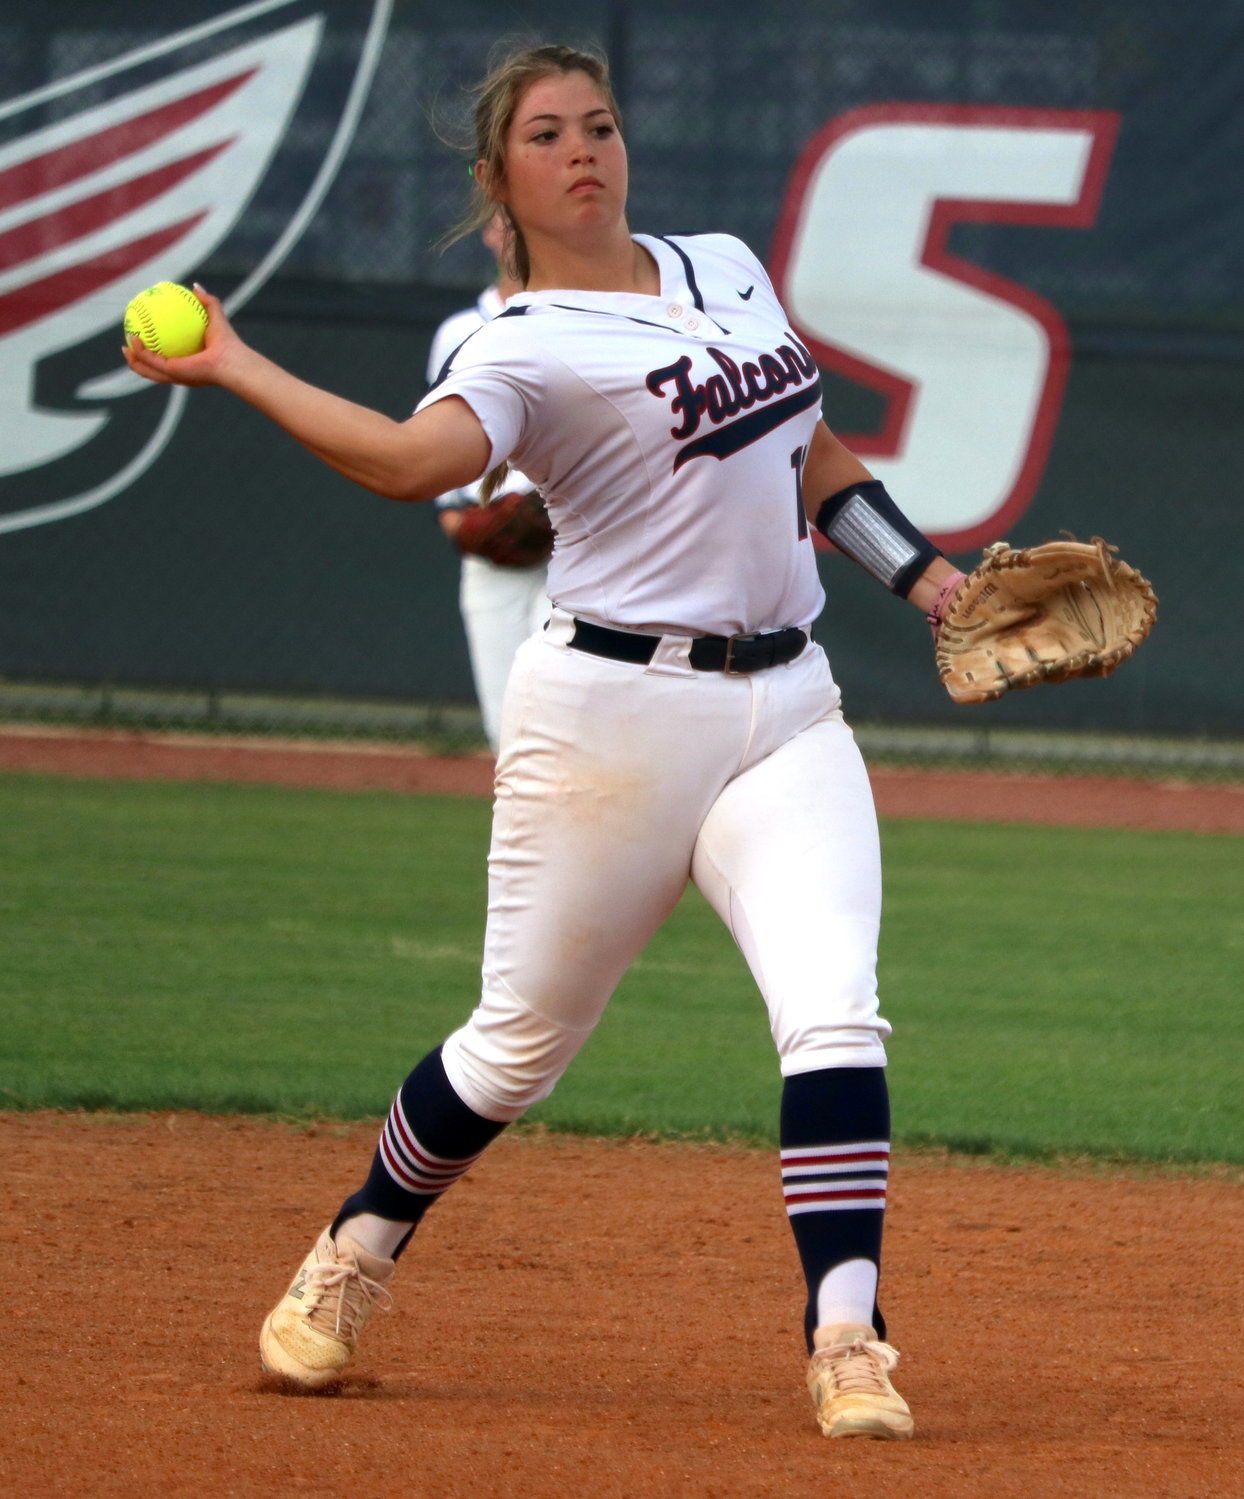 Kaitlyn Scribner throws a ball to first base during Thursday’s bi-district game between Tompkins and George Ranch at the Tompkins softball field.